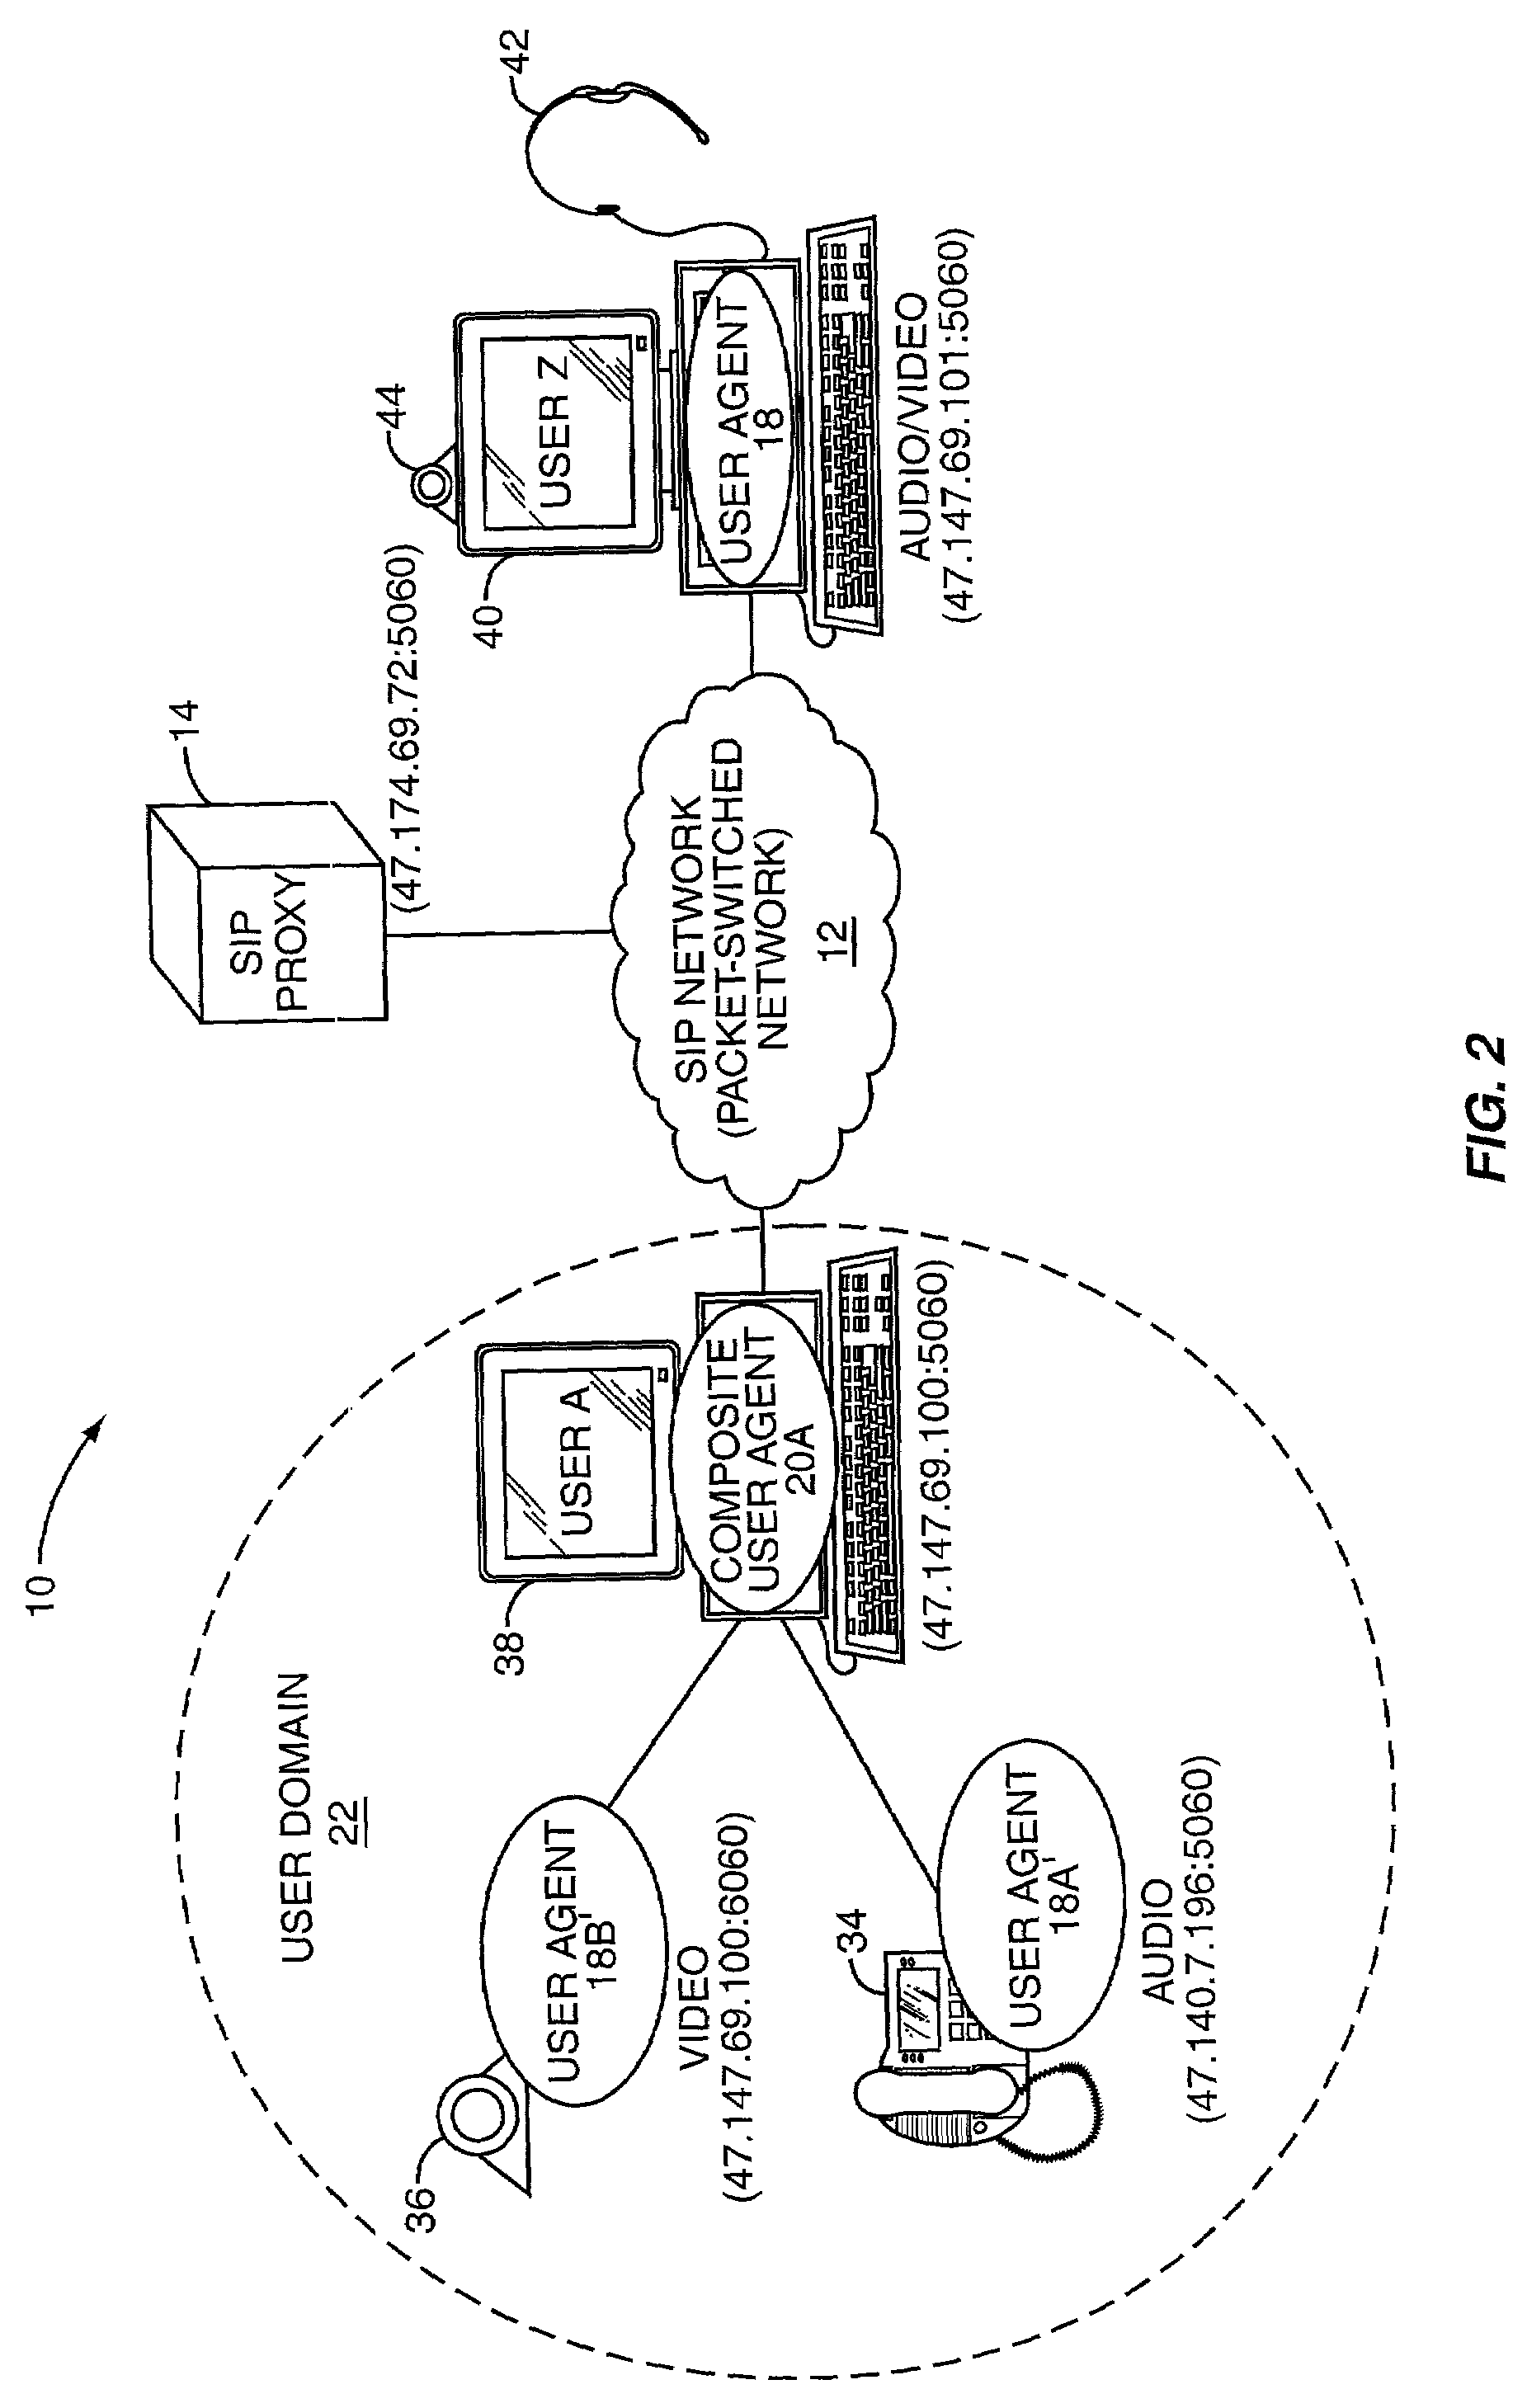 System for routing incoming message to various devices based on media capabilities and type of media session